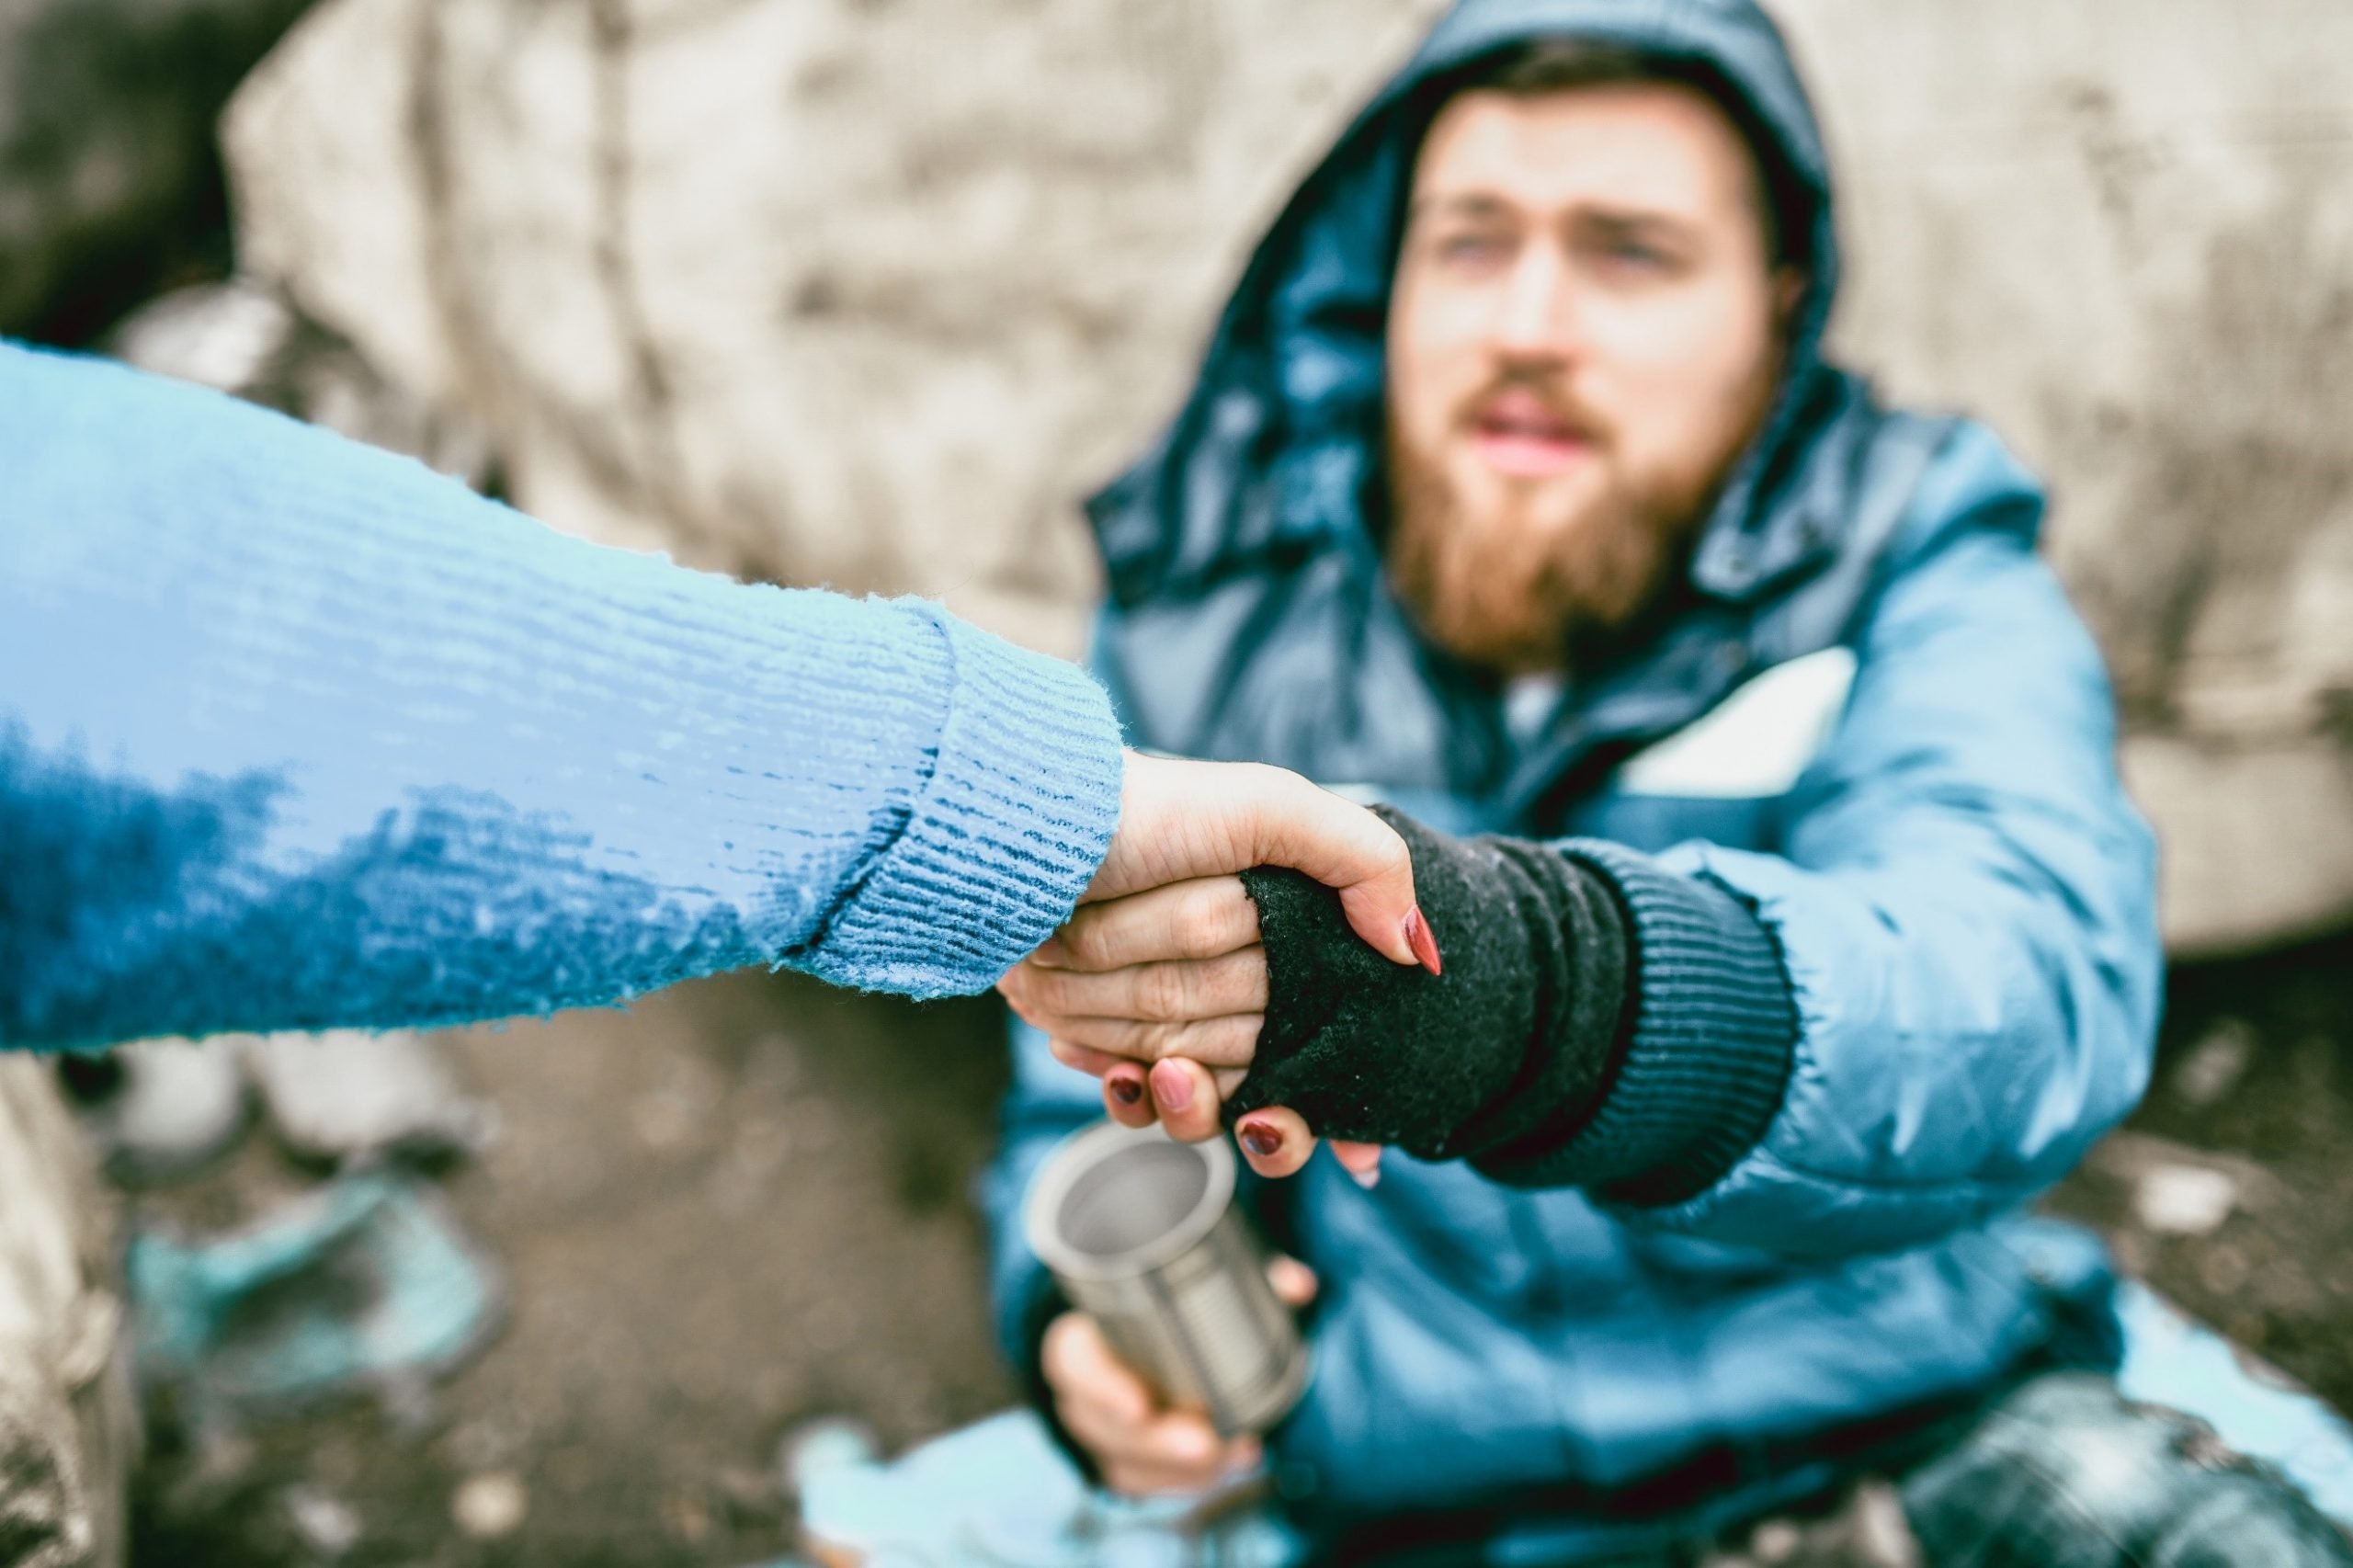 Get warm: together with Partioaitta, we deliver winter coats for the homeless